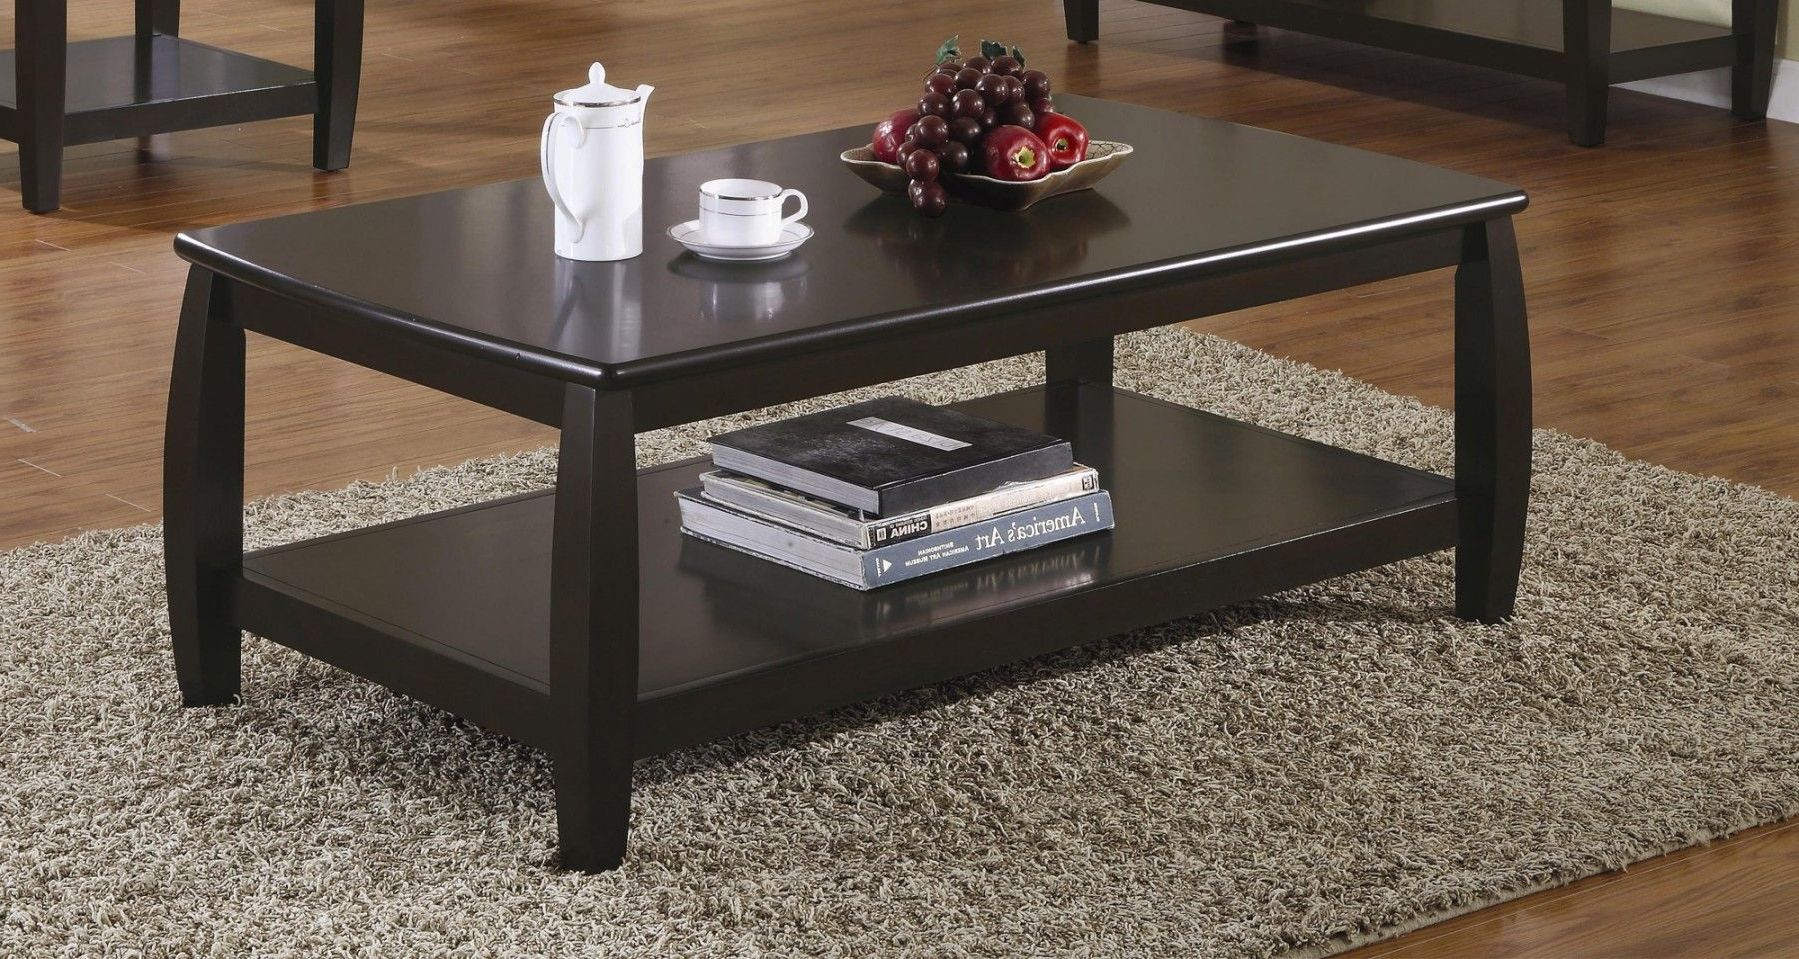 Coaster Wood Top Espresso Coffee Table With 1 Shelf In Best And Newest 1 Shelf Coffee Tables (Gallery 5 of 20)